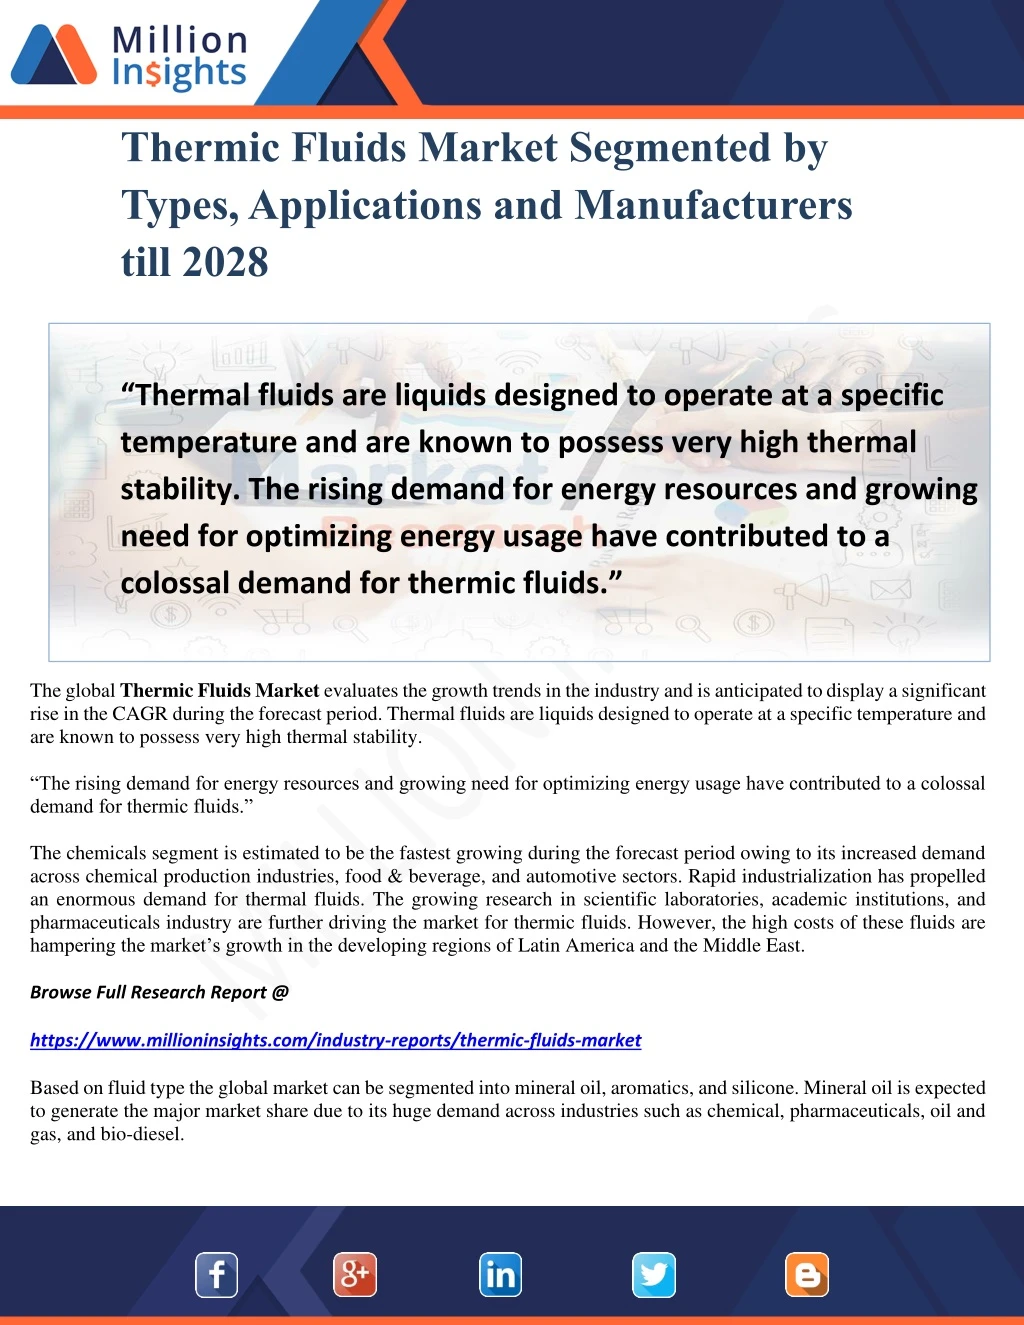 thermic fluids market segmented by types